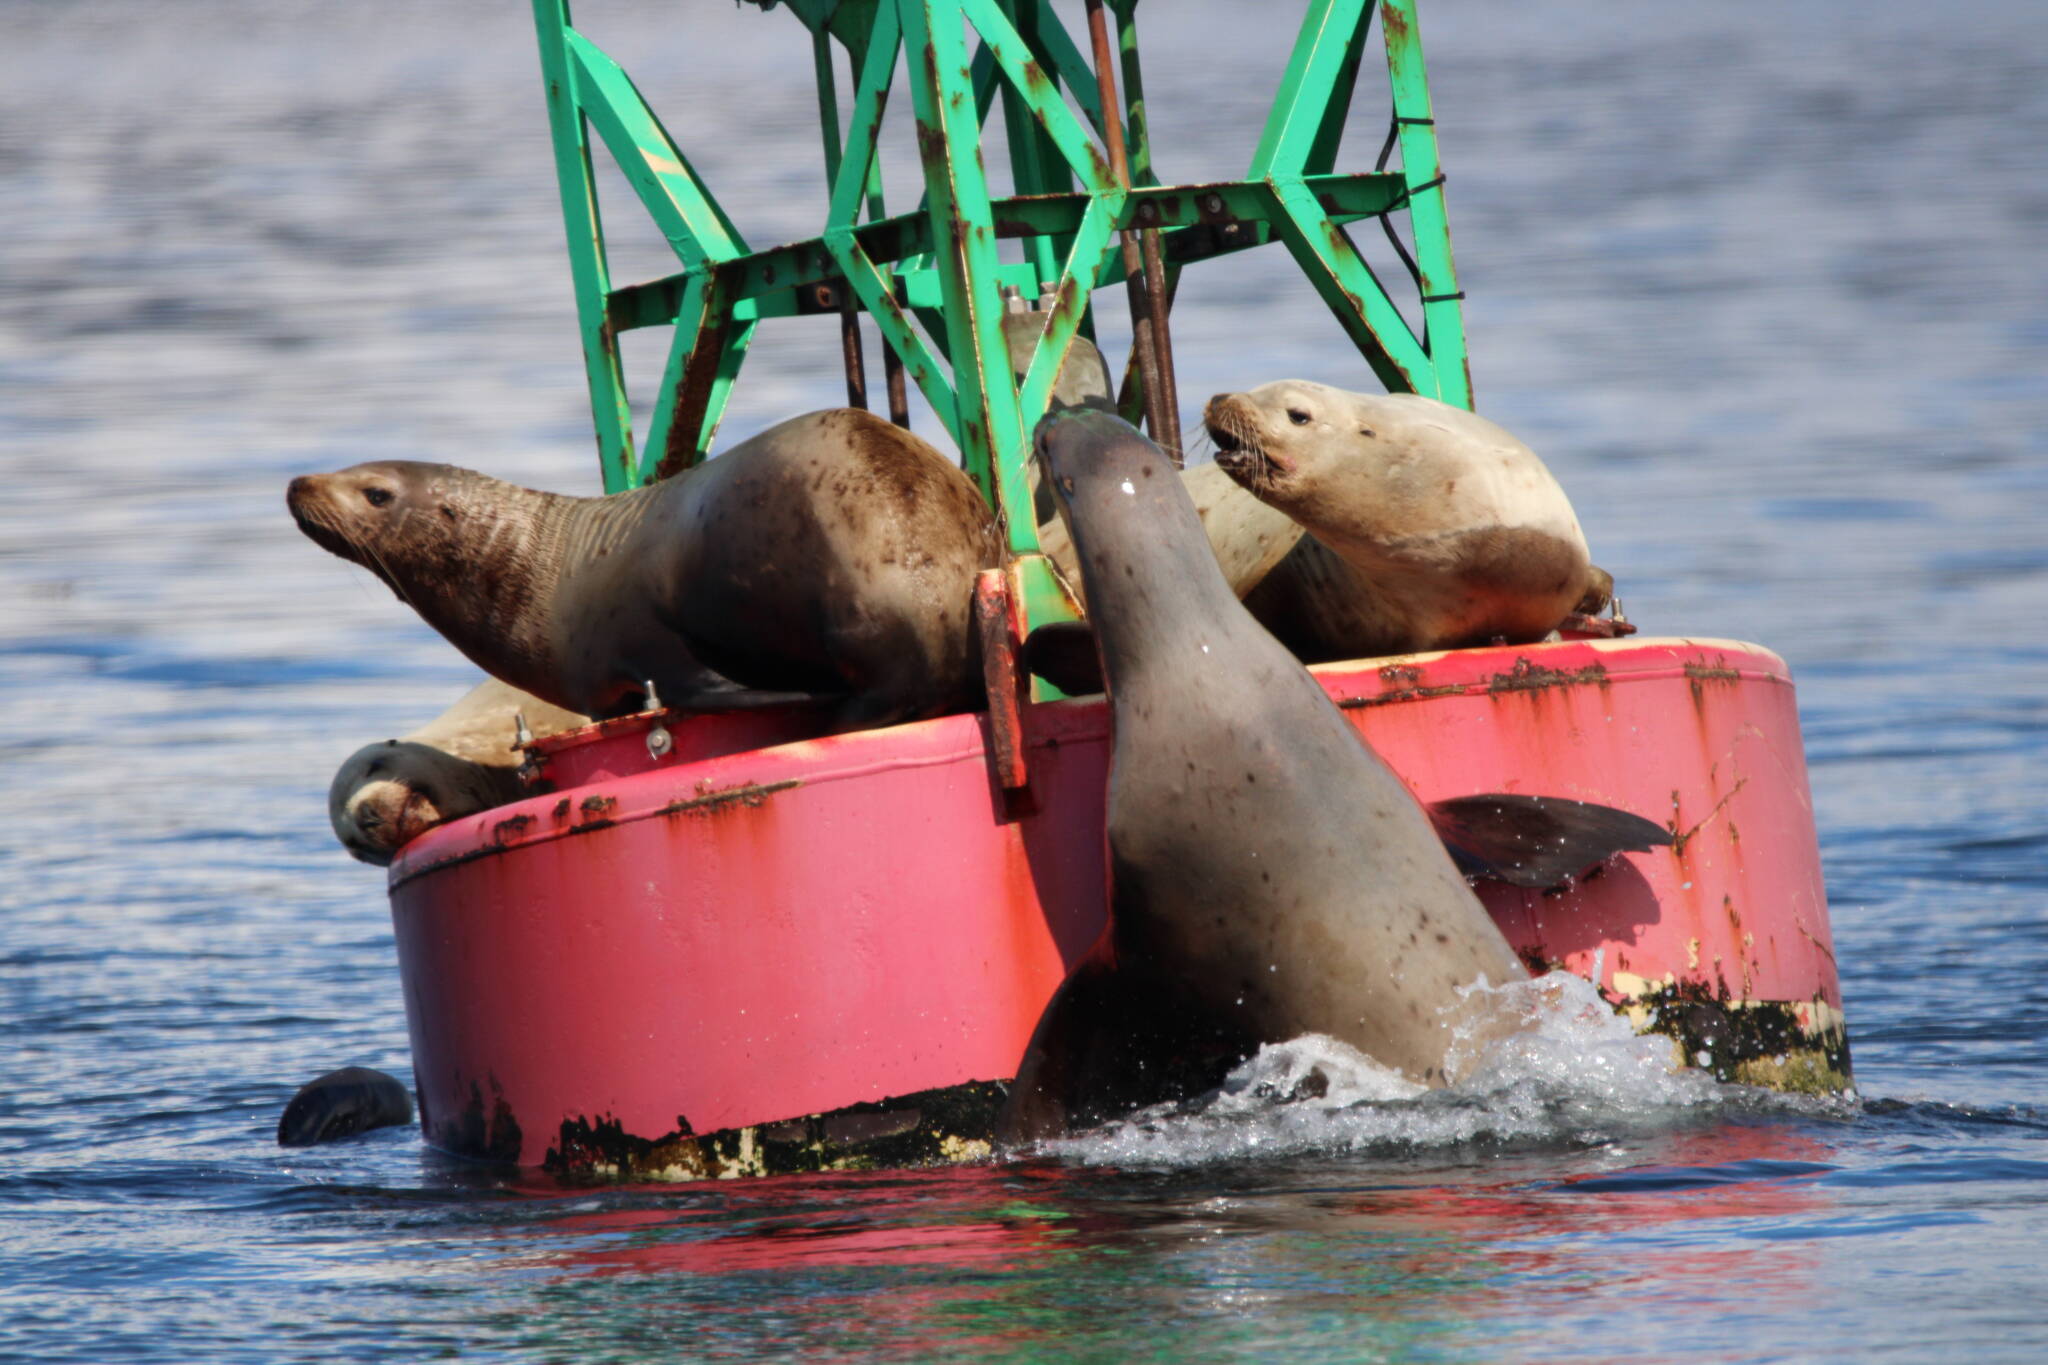 “They wouldn’t let the sea lion in the water onto the buoy,” writes Carolyn Kelley of this May 13 photo. “There were several attempts.” (Courtesy Photo / Carolyn Kelley)